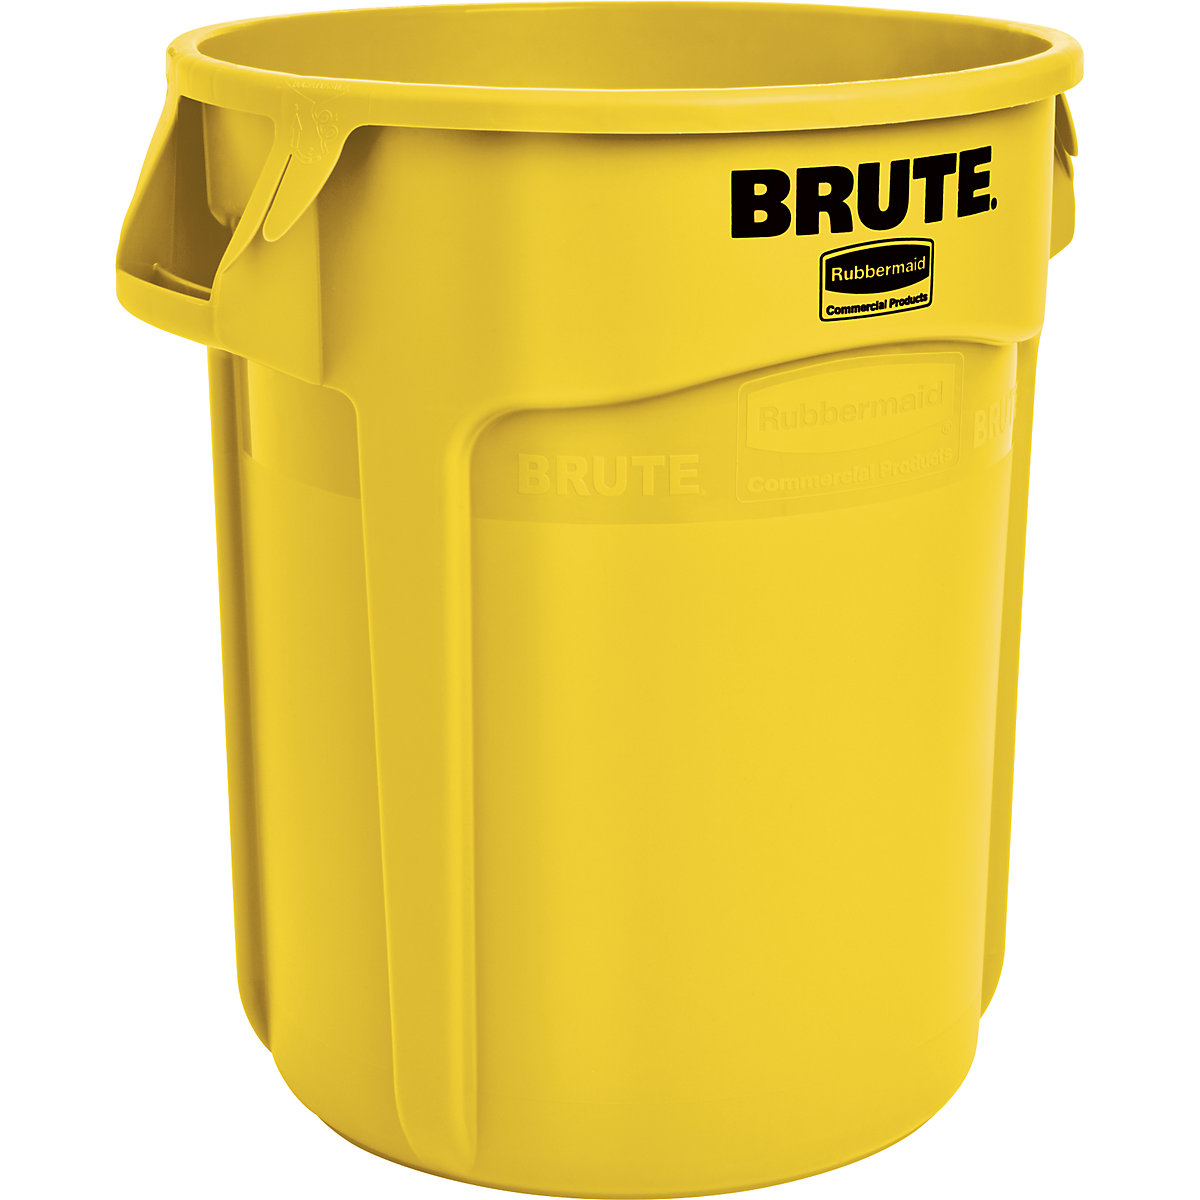 Rubbermaid – BRUTE® universal container/multi purpose container, round, capacity approx. 75 l, yellow